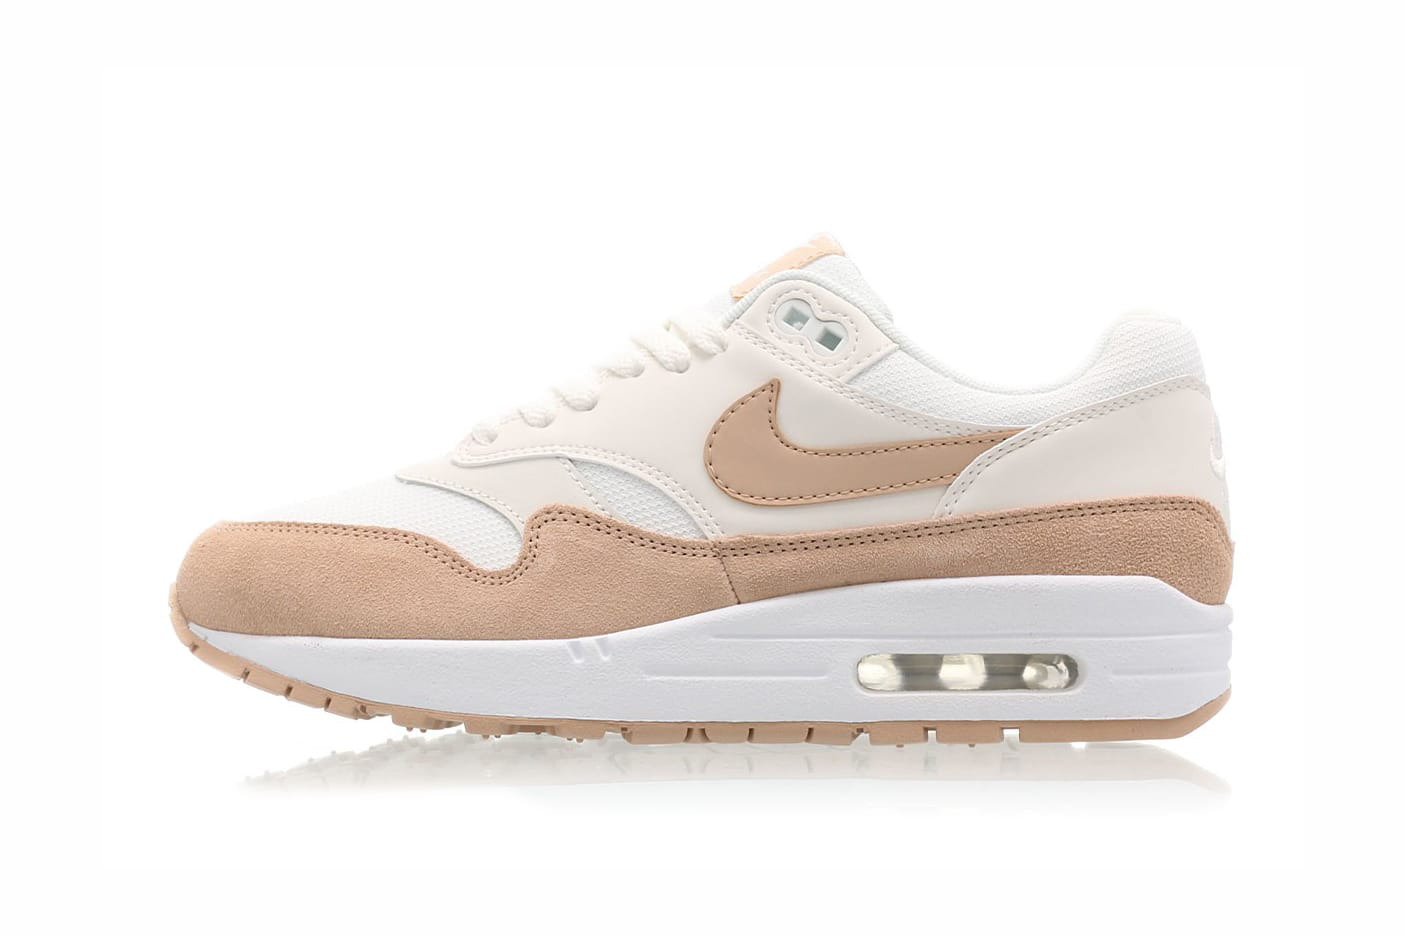 Nike Releases Air Max 1 